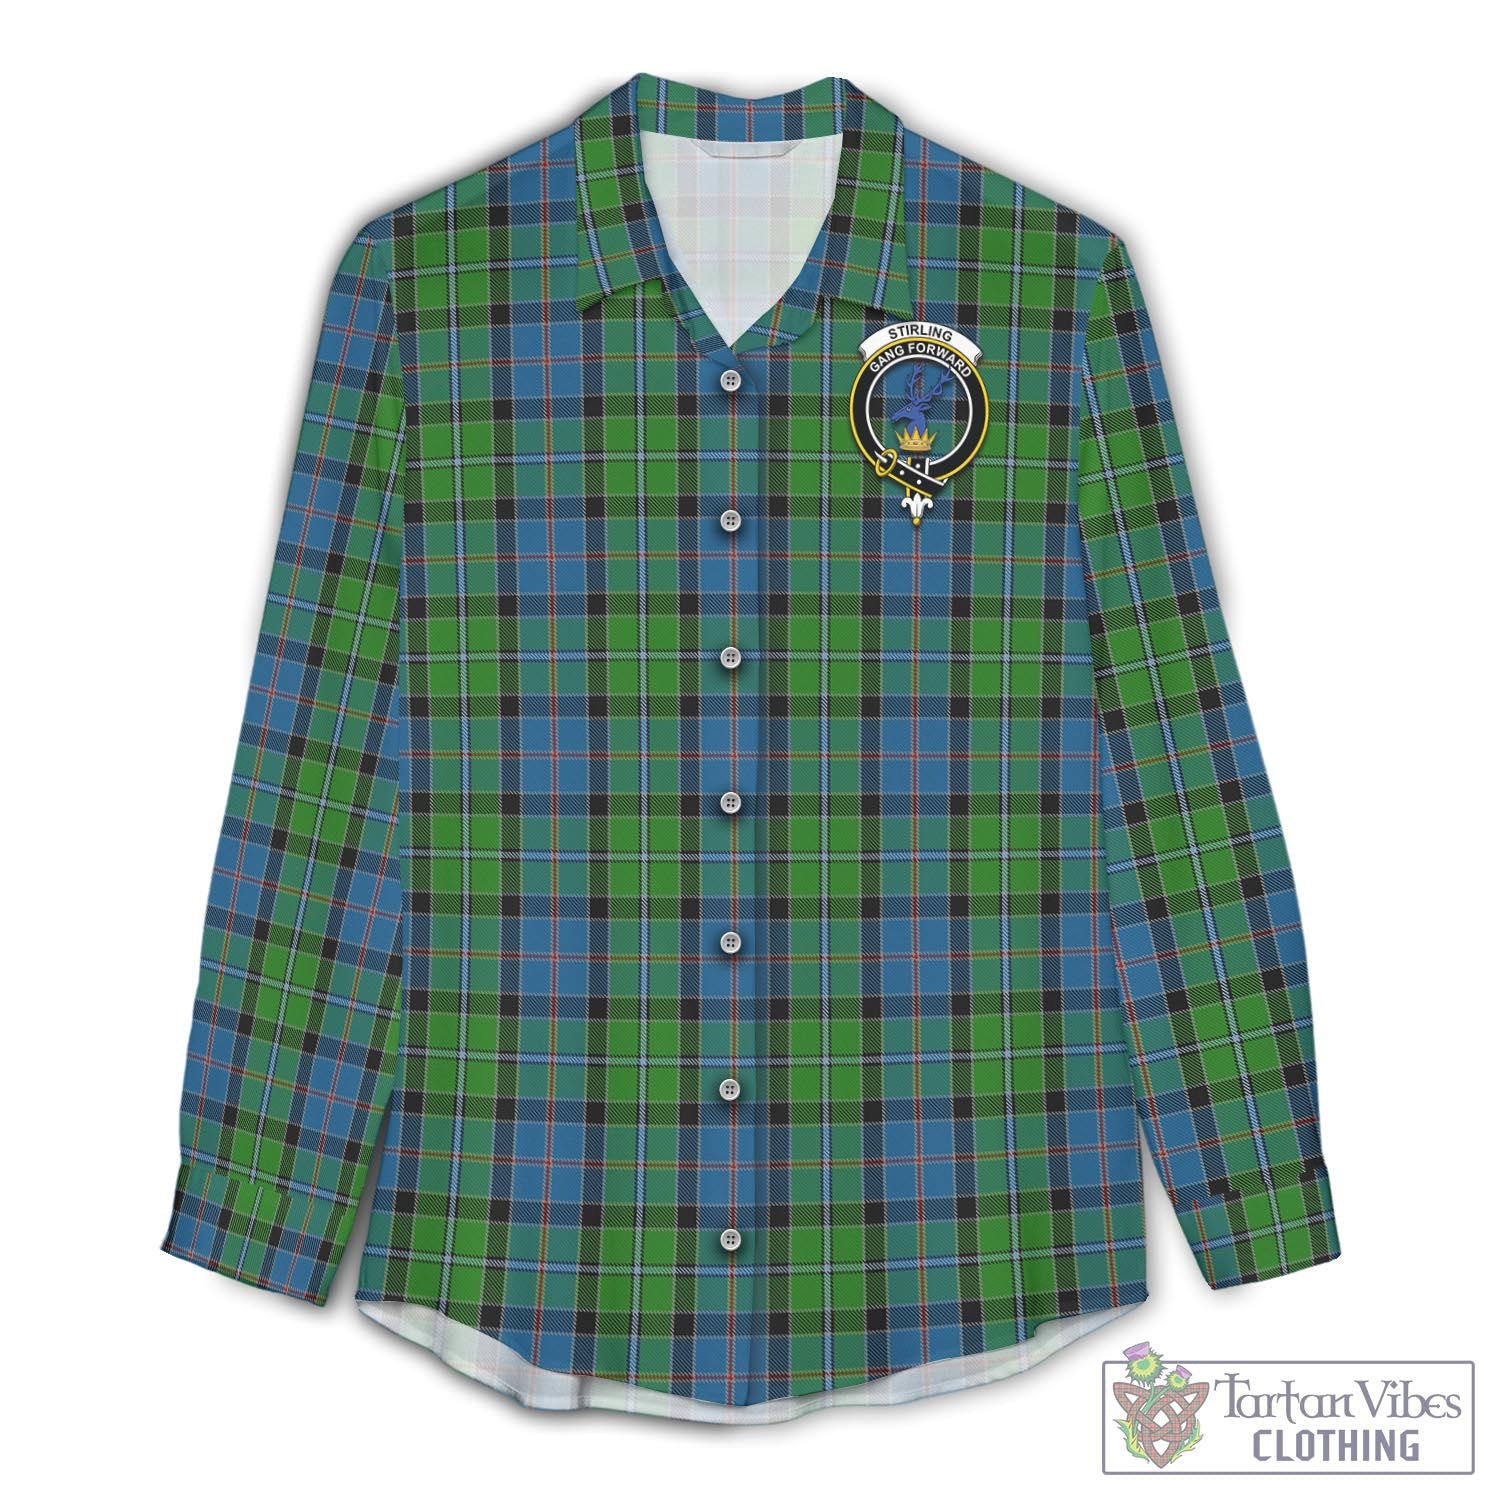 Tartan Vibes Clothing Stirling Tartan Womens Casual Shirt with Family Crest